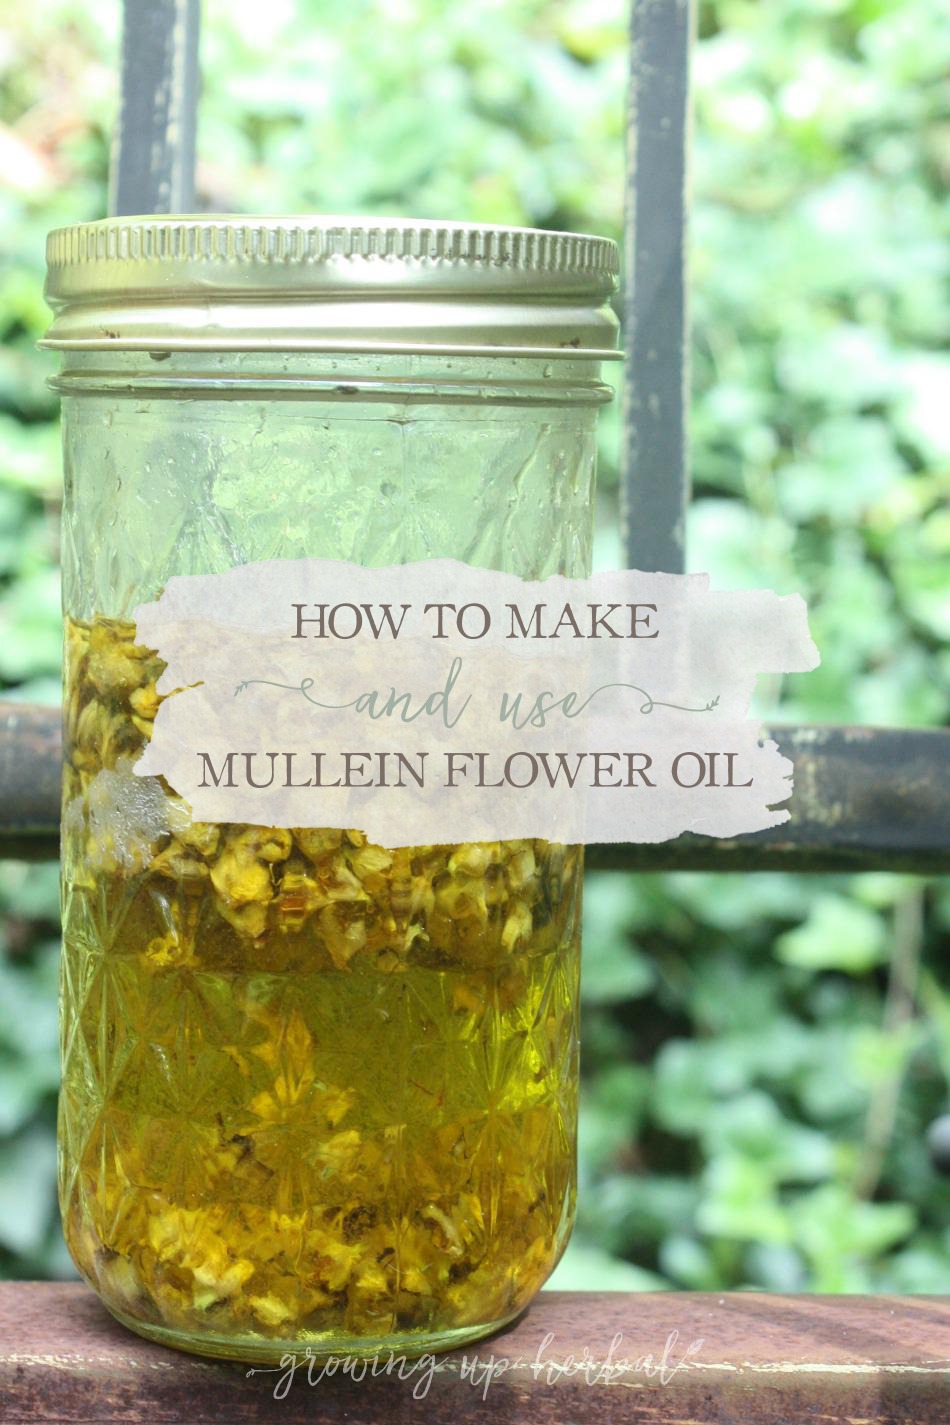 How To Make And Use Mullein Flower Oil | Growing Up Herbal | Mullein flower oil is a great oil to keep on hand as it can be used in many ways for your family's wellness.